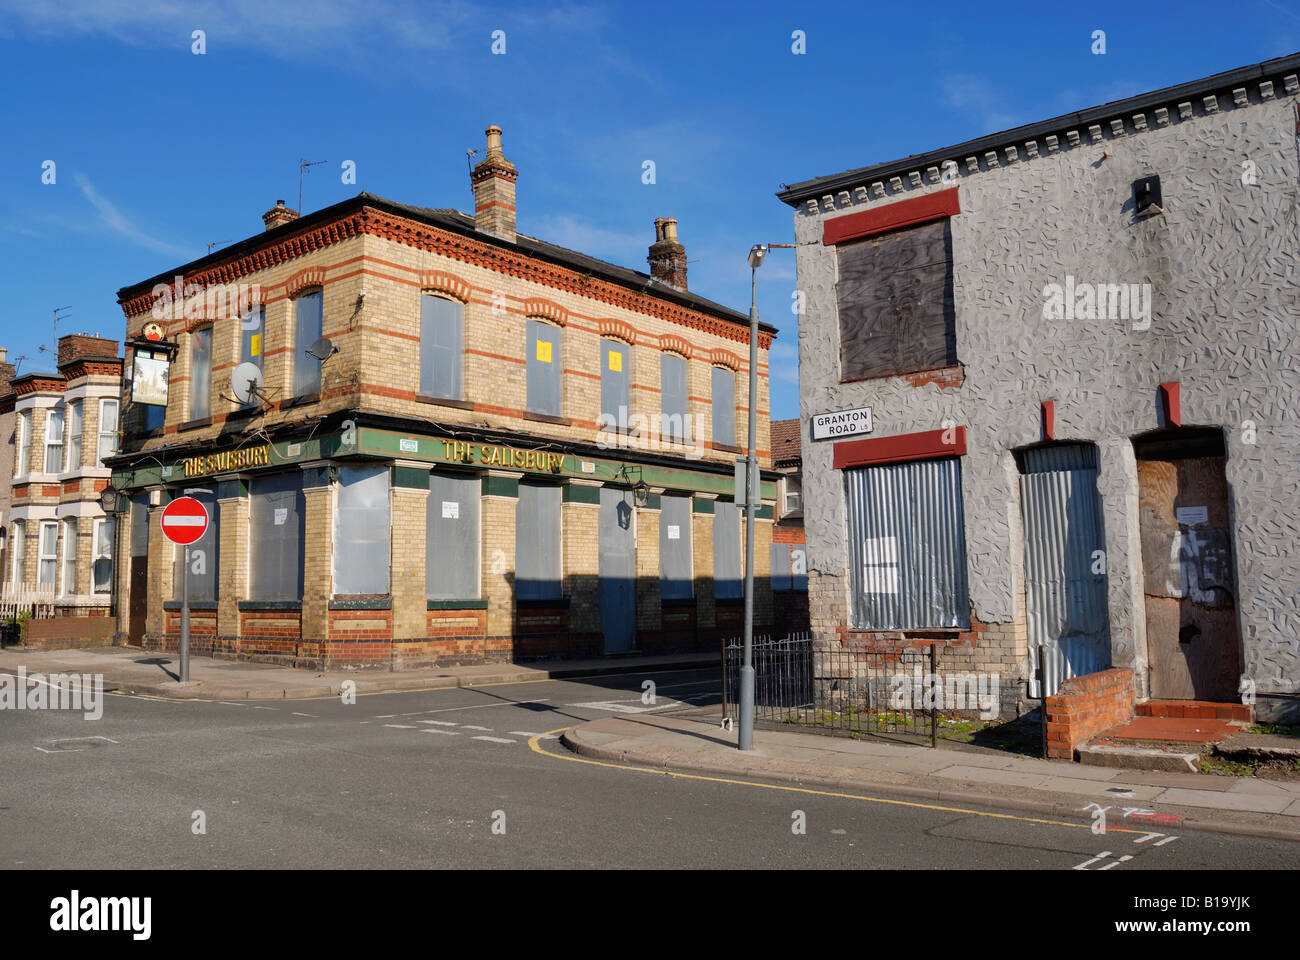 The Salisbury public house and homes boarded up in Granton Road  Anfield, Liverpool boarded up ready for redevelopment. Stock Photo